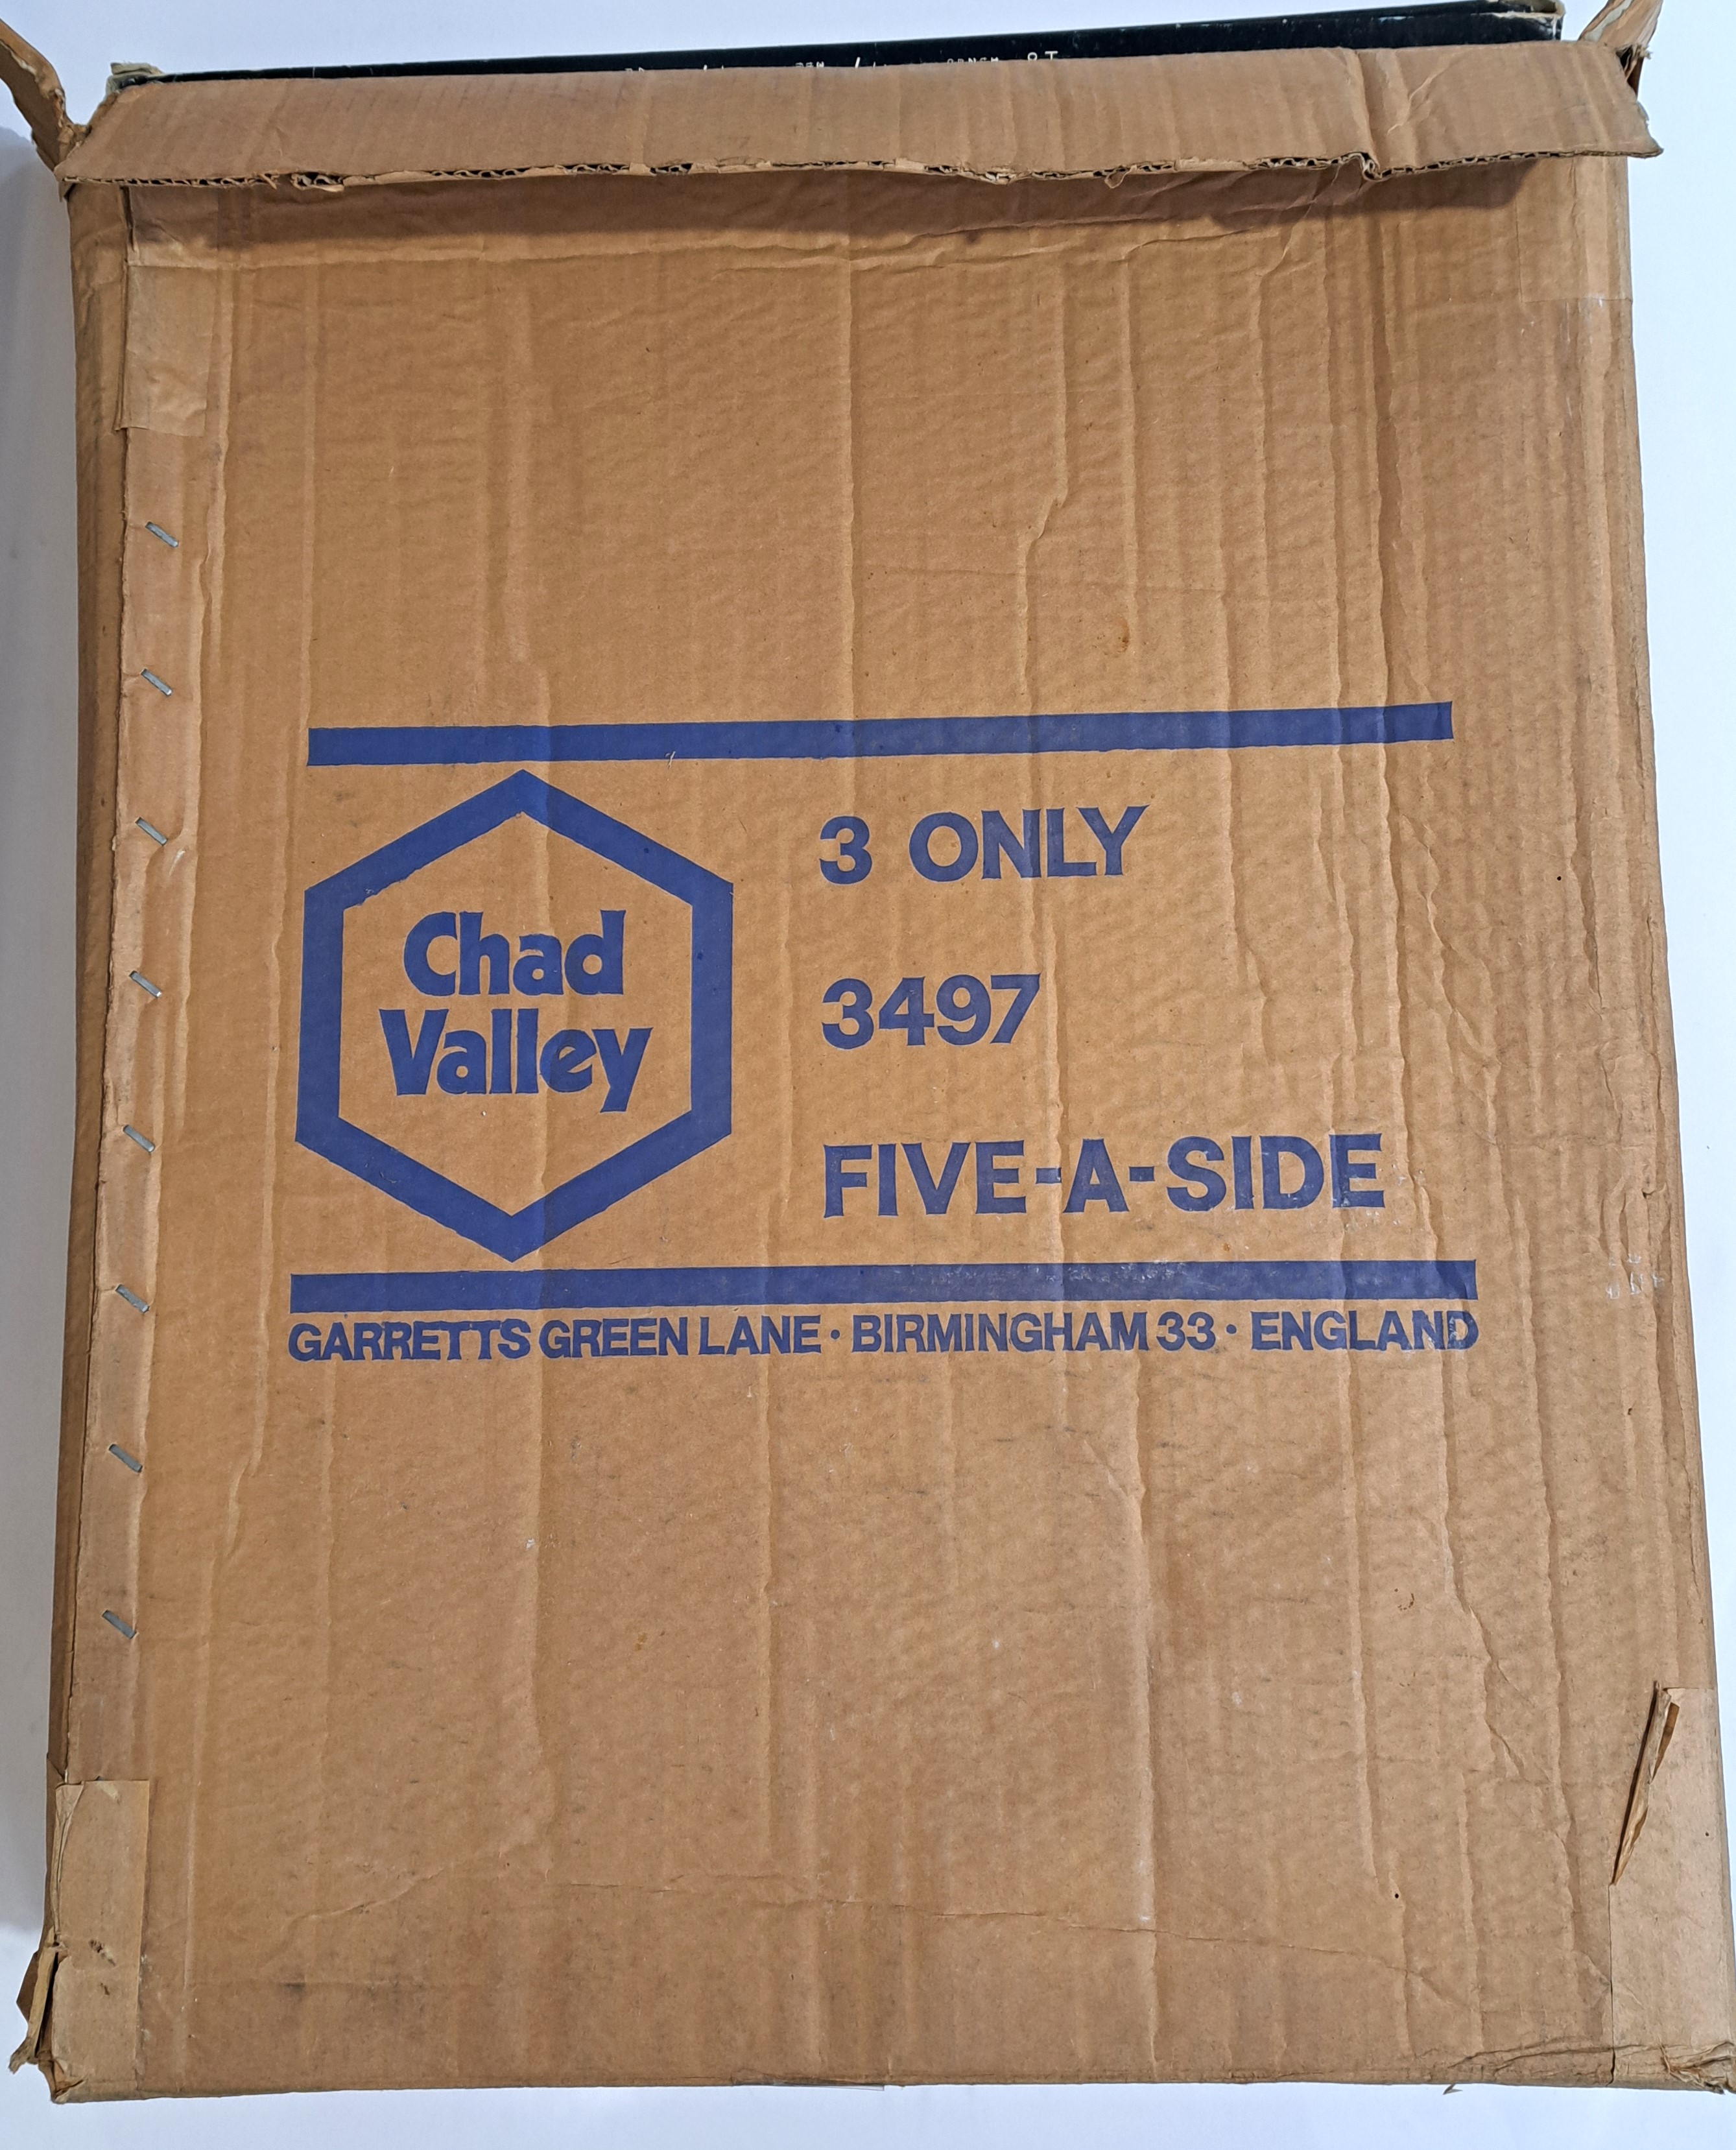 Chad Valley "Five A Side" X3 boxed football games complete with original Chad Valley OUTER TRADE BOX - Image 3 of 5